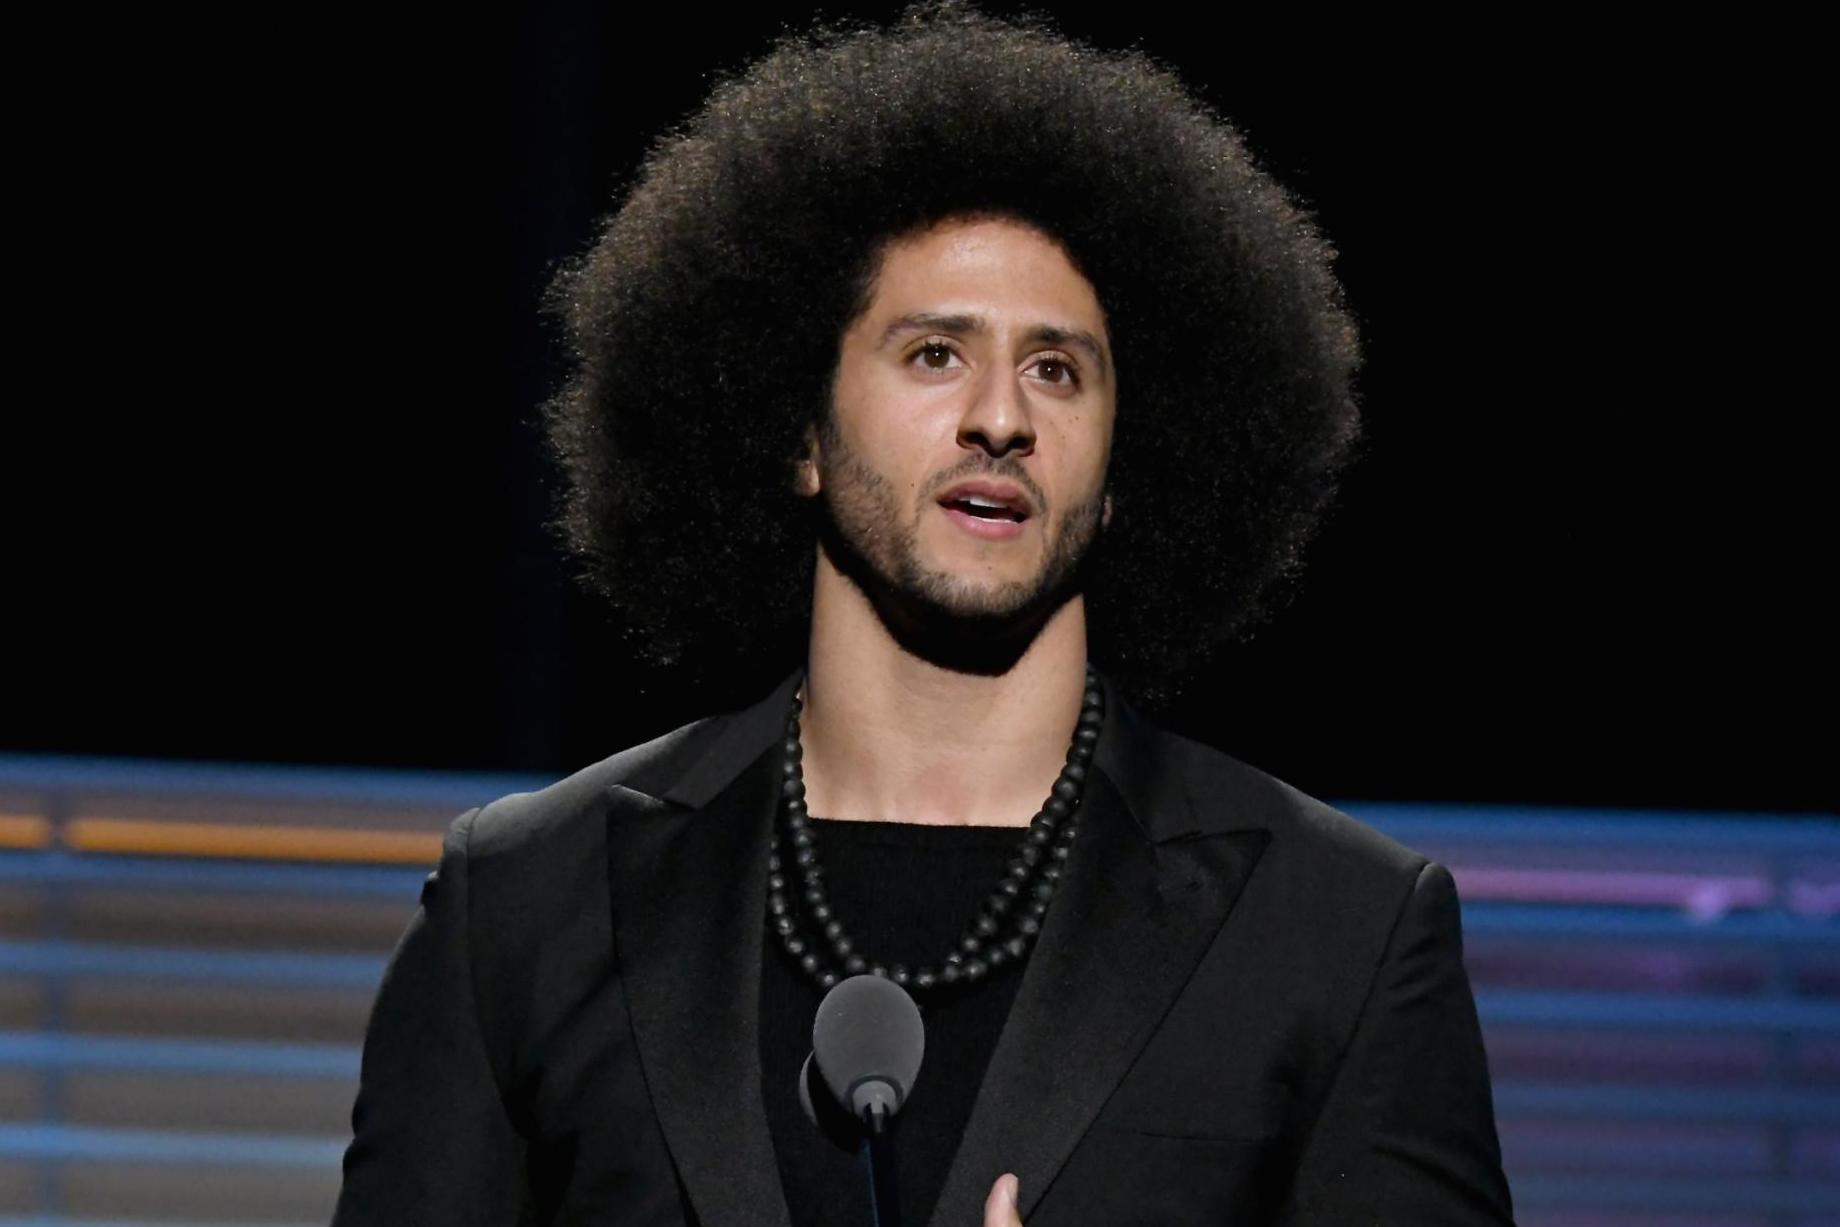 Colin Kaepernick receives the SI Muhammad Ali Legacy Award during SPORTS ILLUSTRATED 2017 Sportsperson of the Year Show on 5 December, 2017 at Barclays Center in New York City.